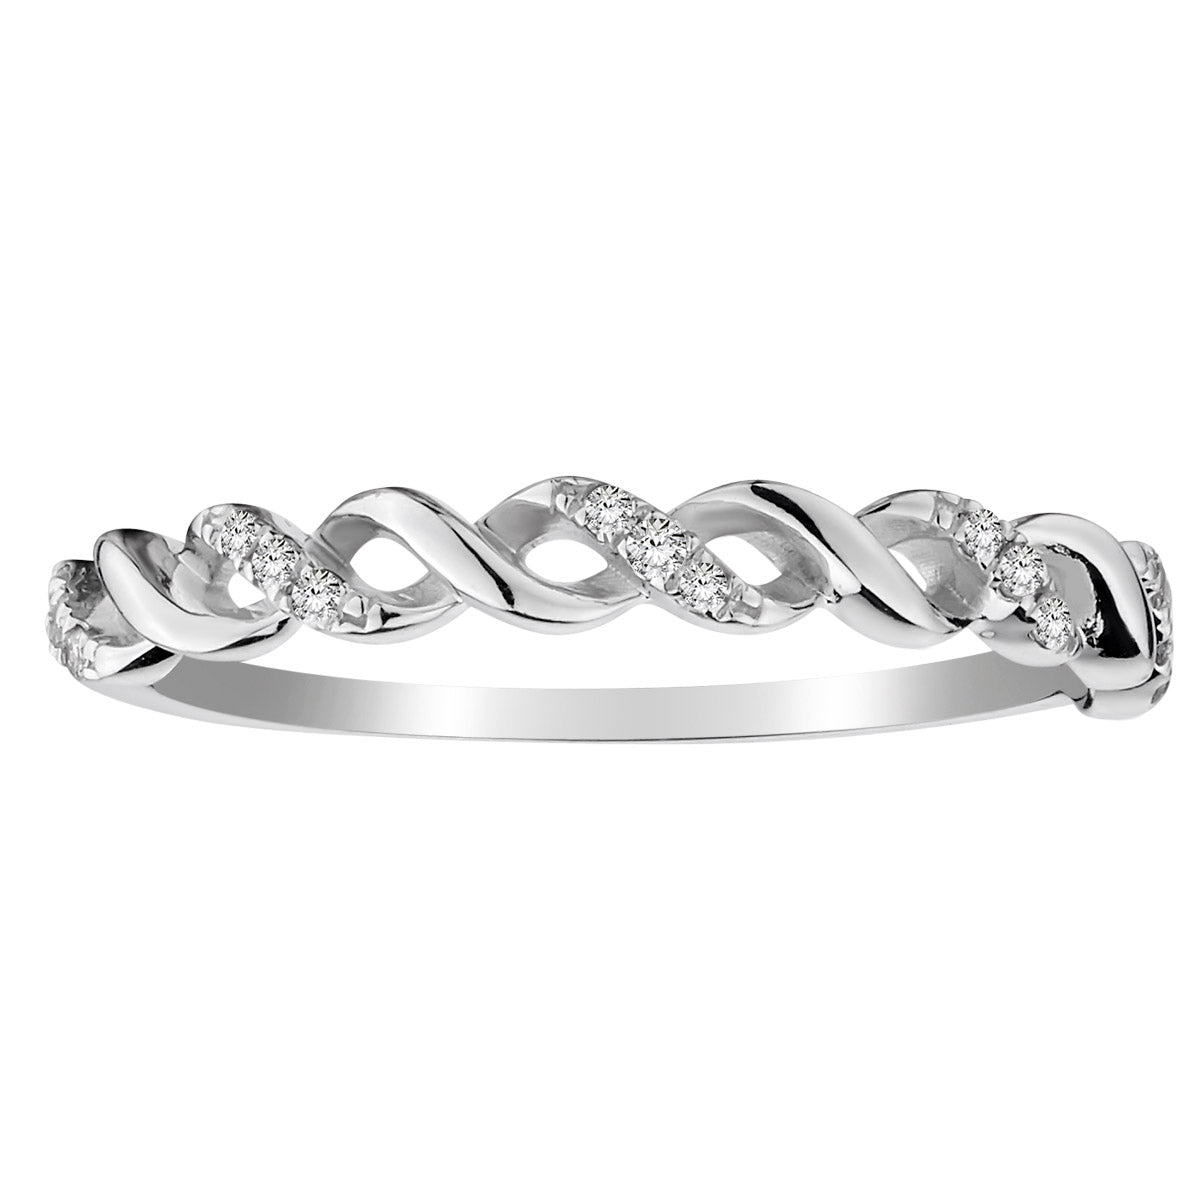 .08 Carat of Diamonds "Infinity" Ring, 10kt White Gold......................NOW